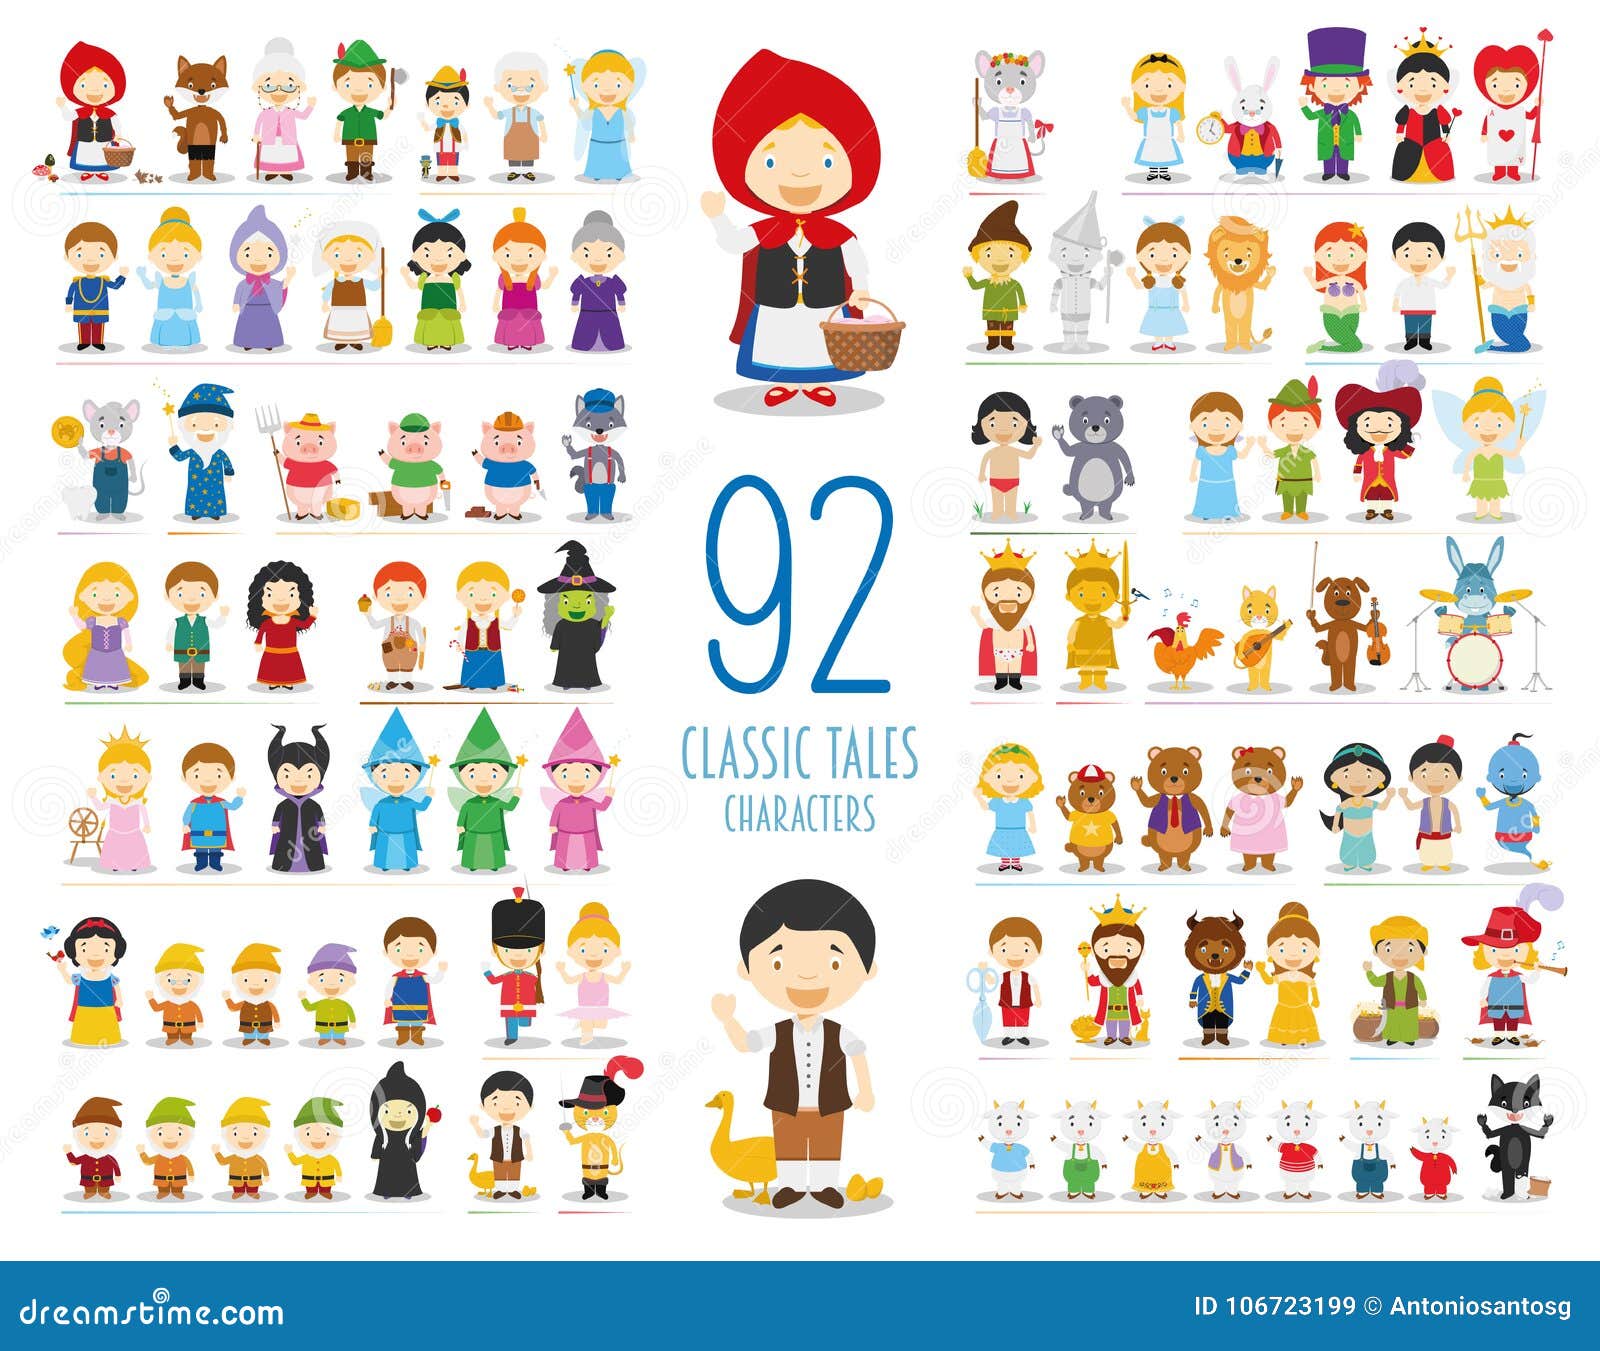 set of 92 classic tales characters in cartoon style